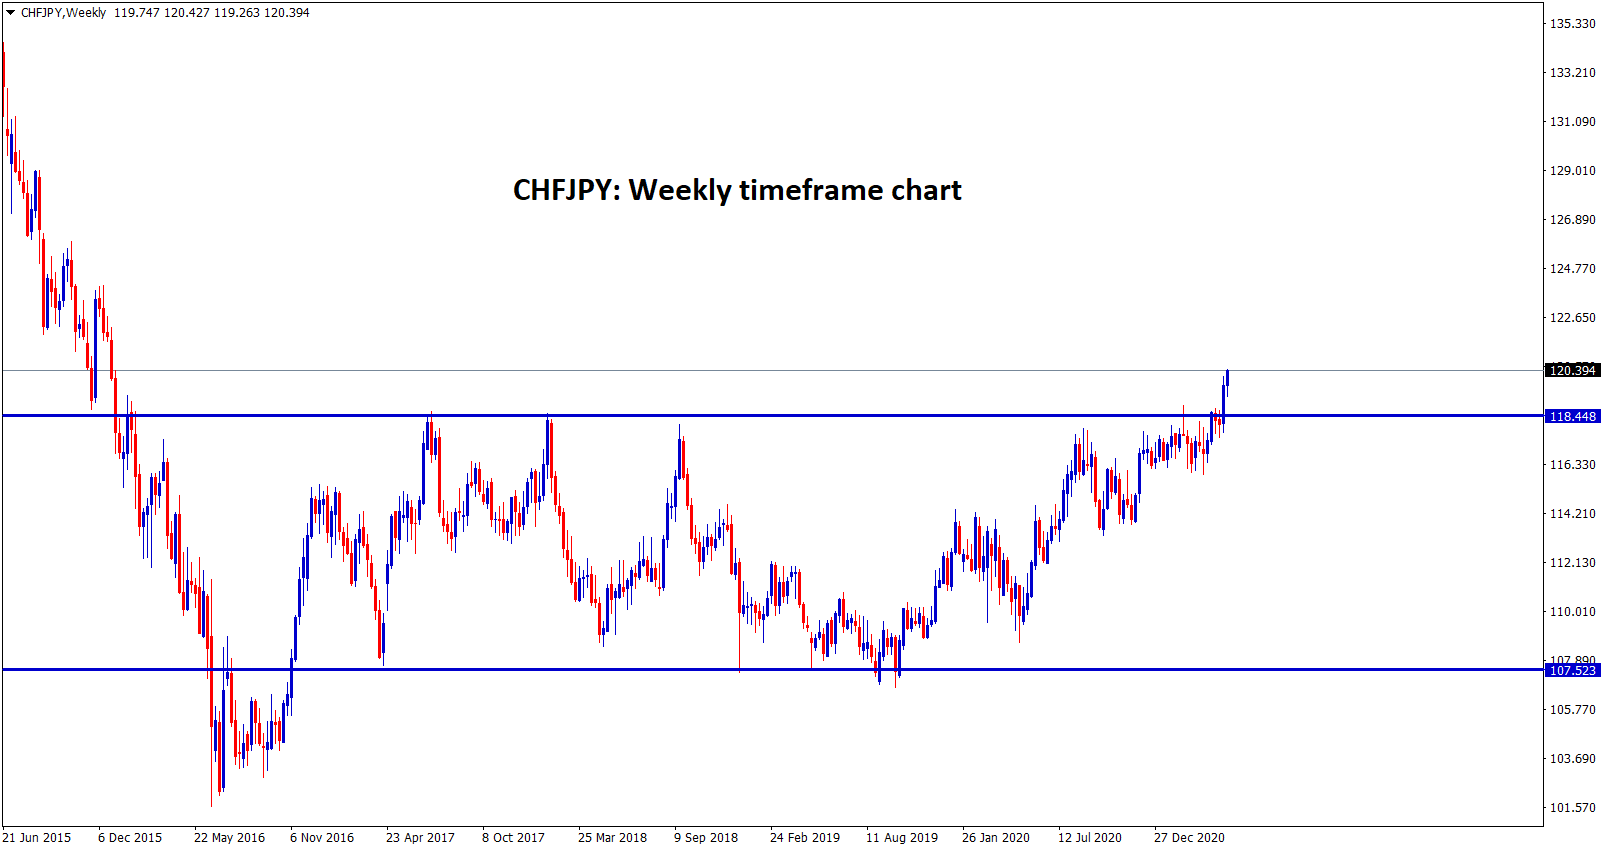 CHFJPY multi year resistance breakout confirms the strong buyers pressure